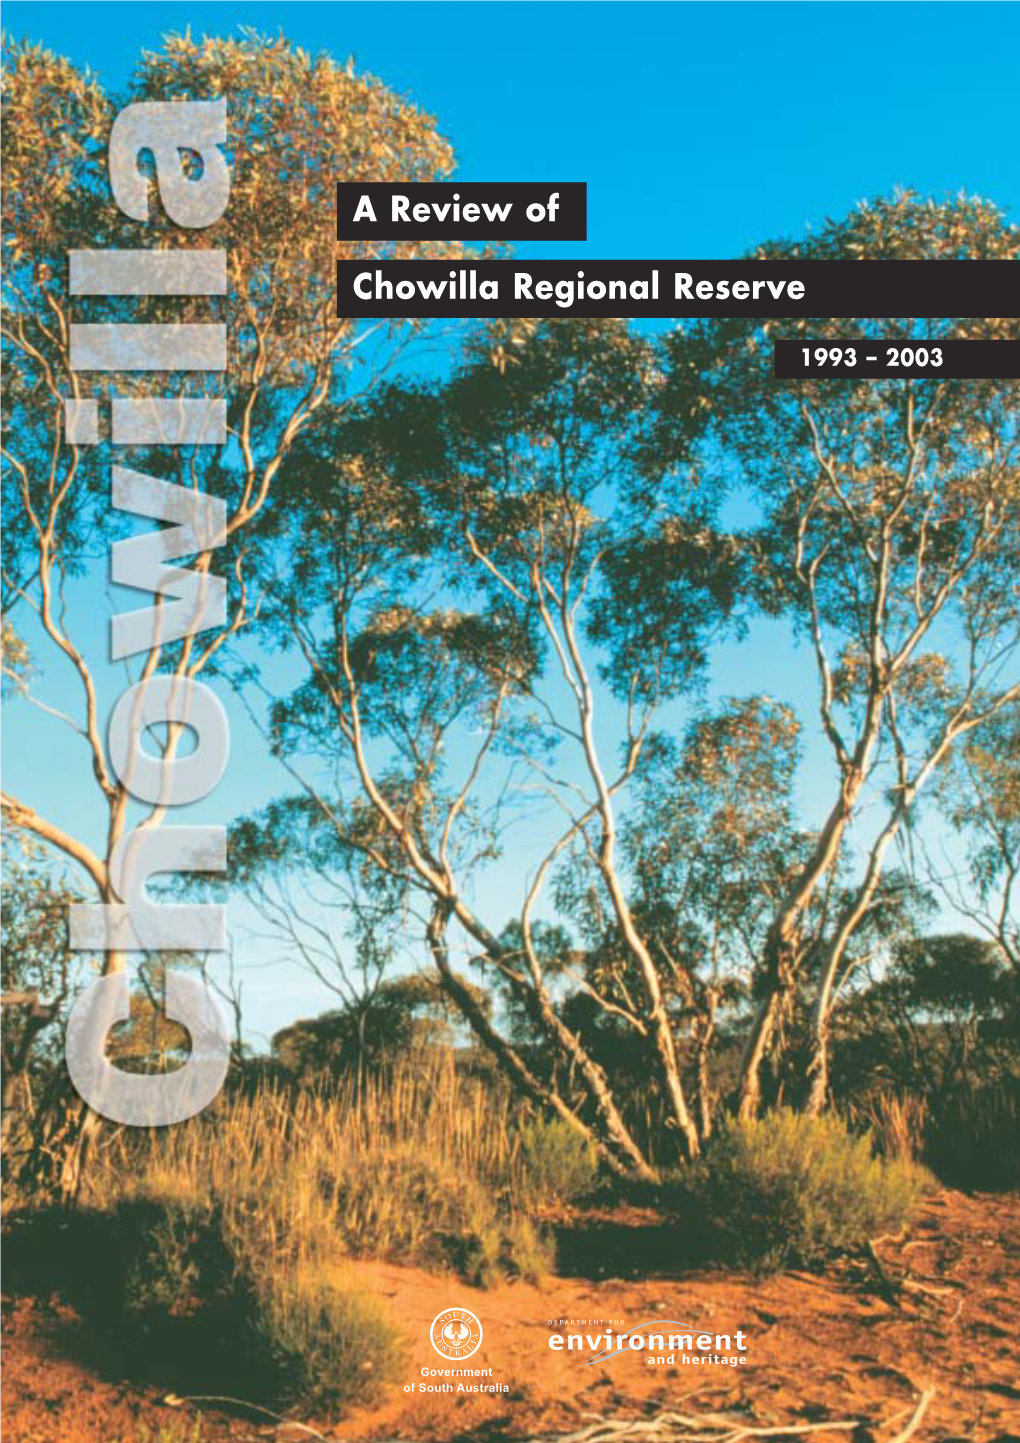 A Review of Chowilla Regional Reserve 1993 – 2003, Adelaide, South Australia.” Department for Environment and Heritage